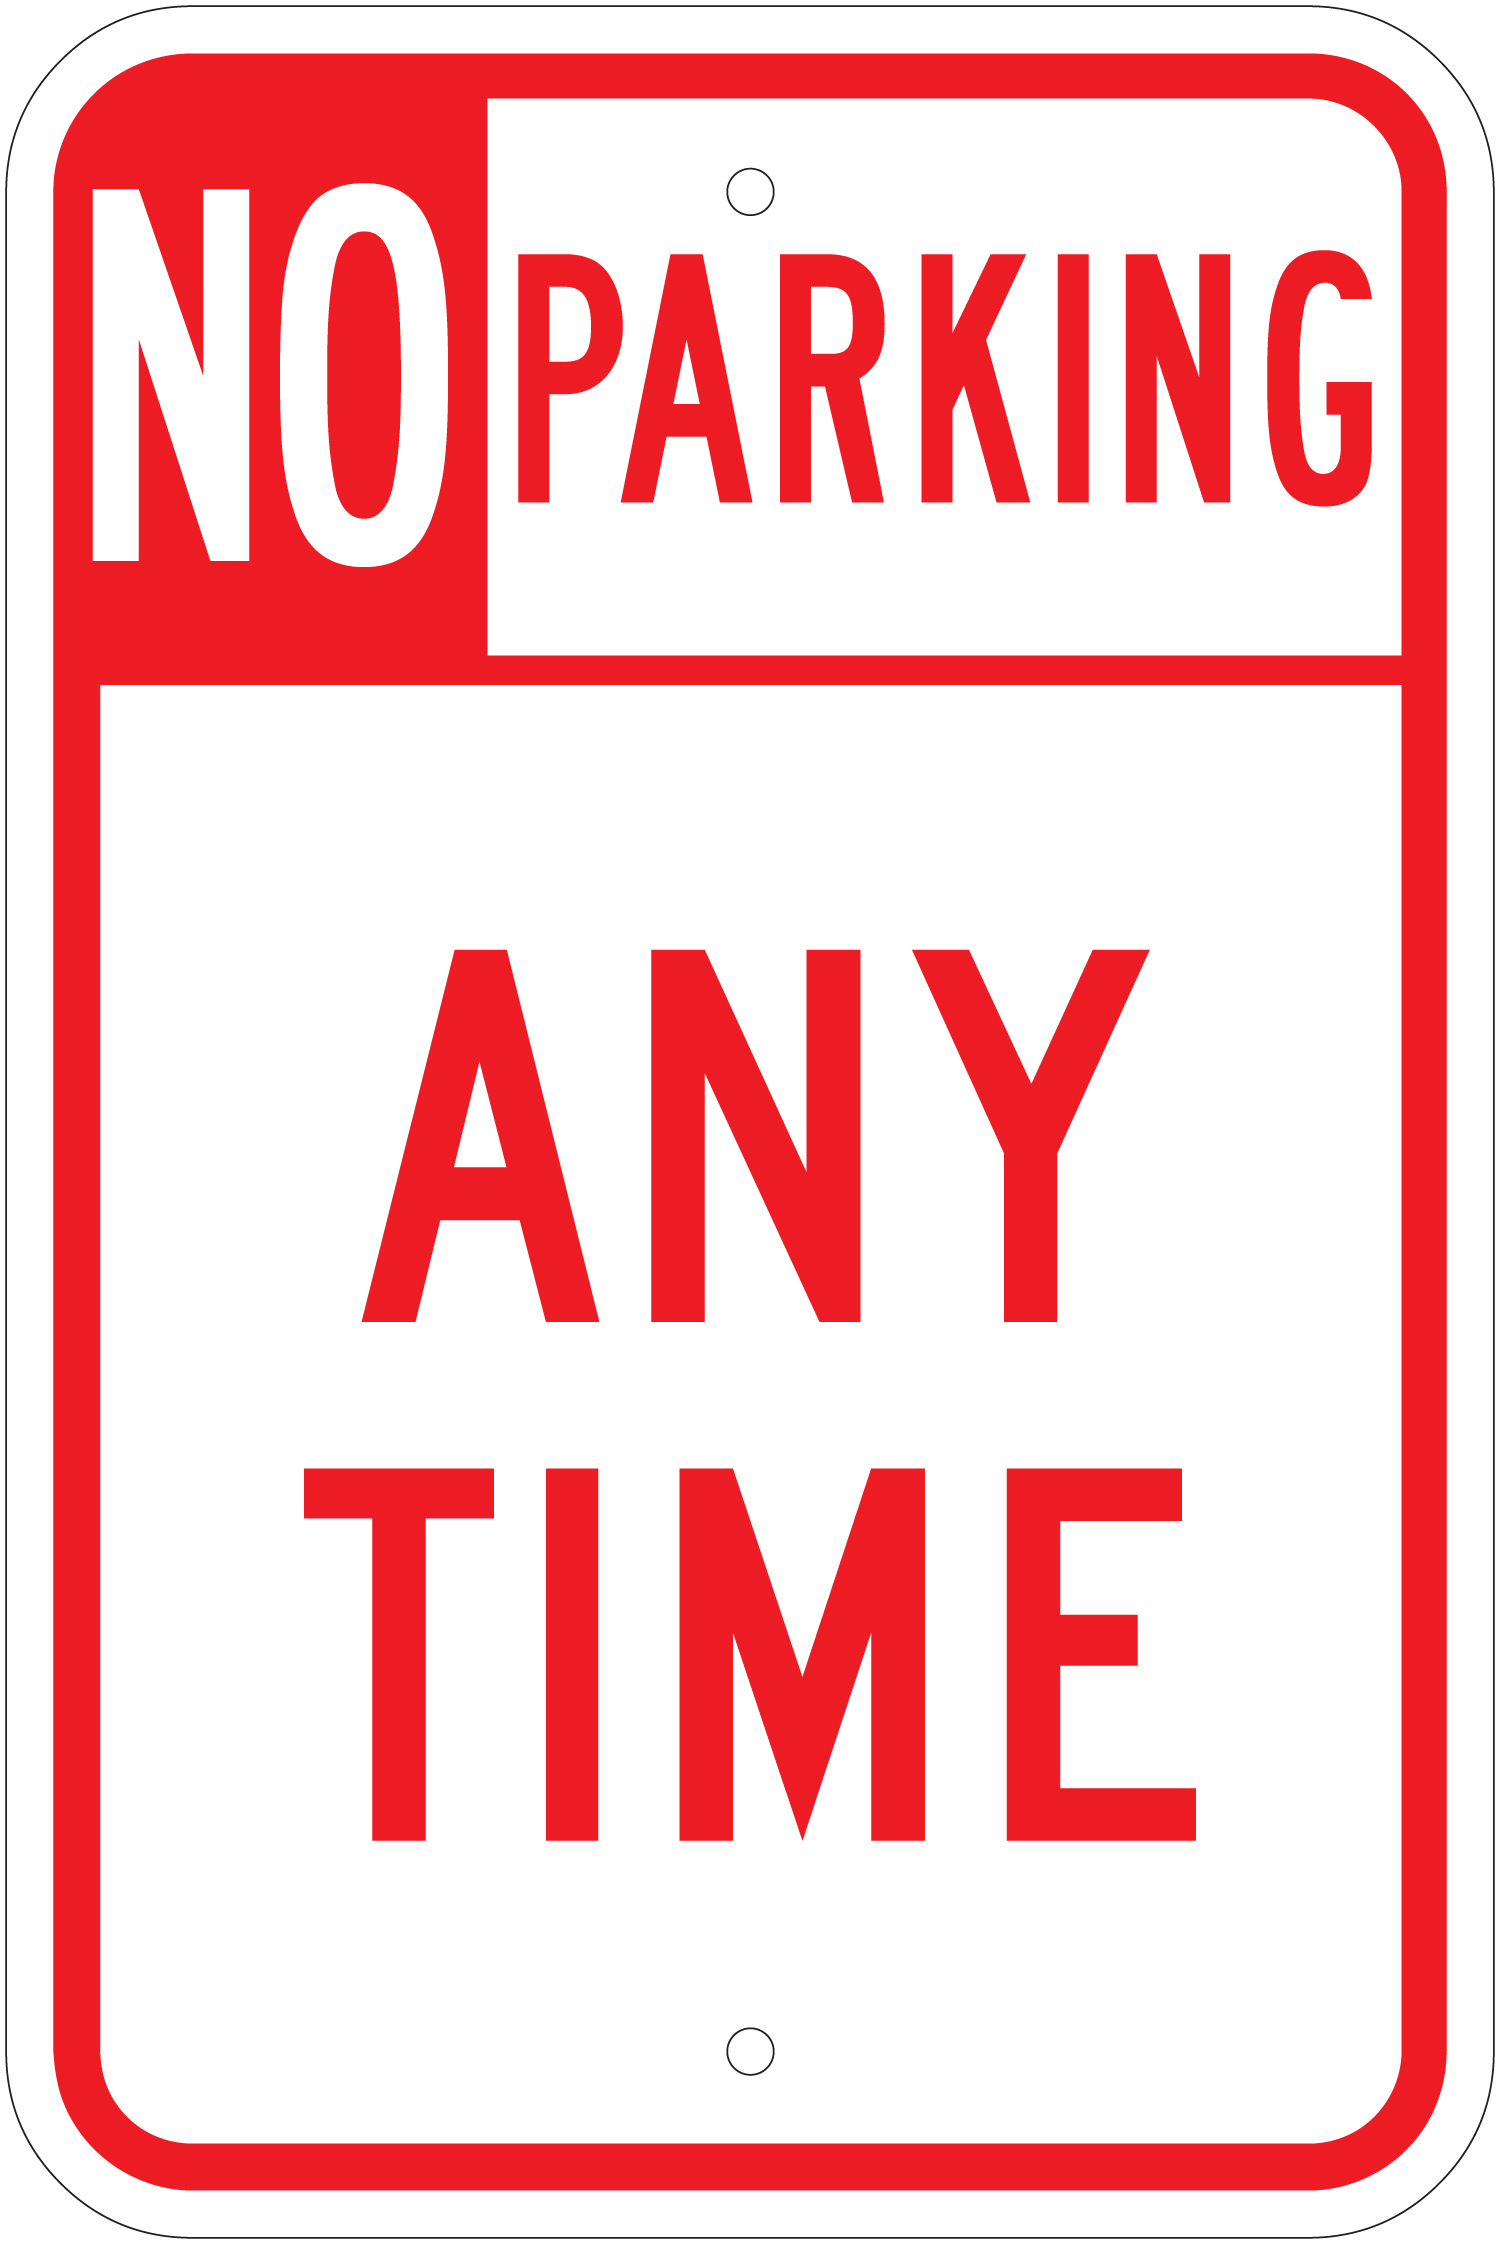 No Parking Signs - ClipArt Best